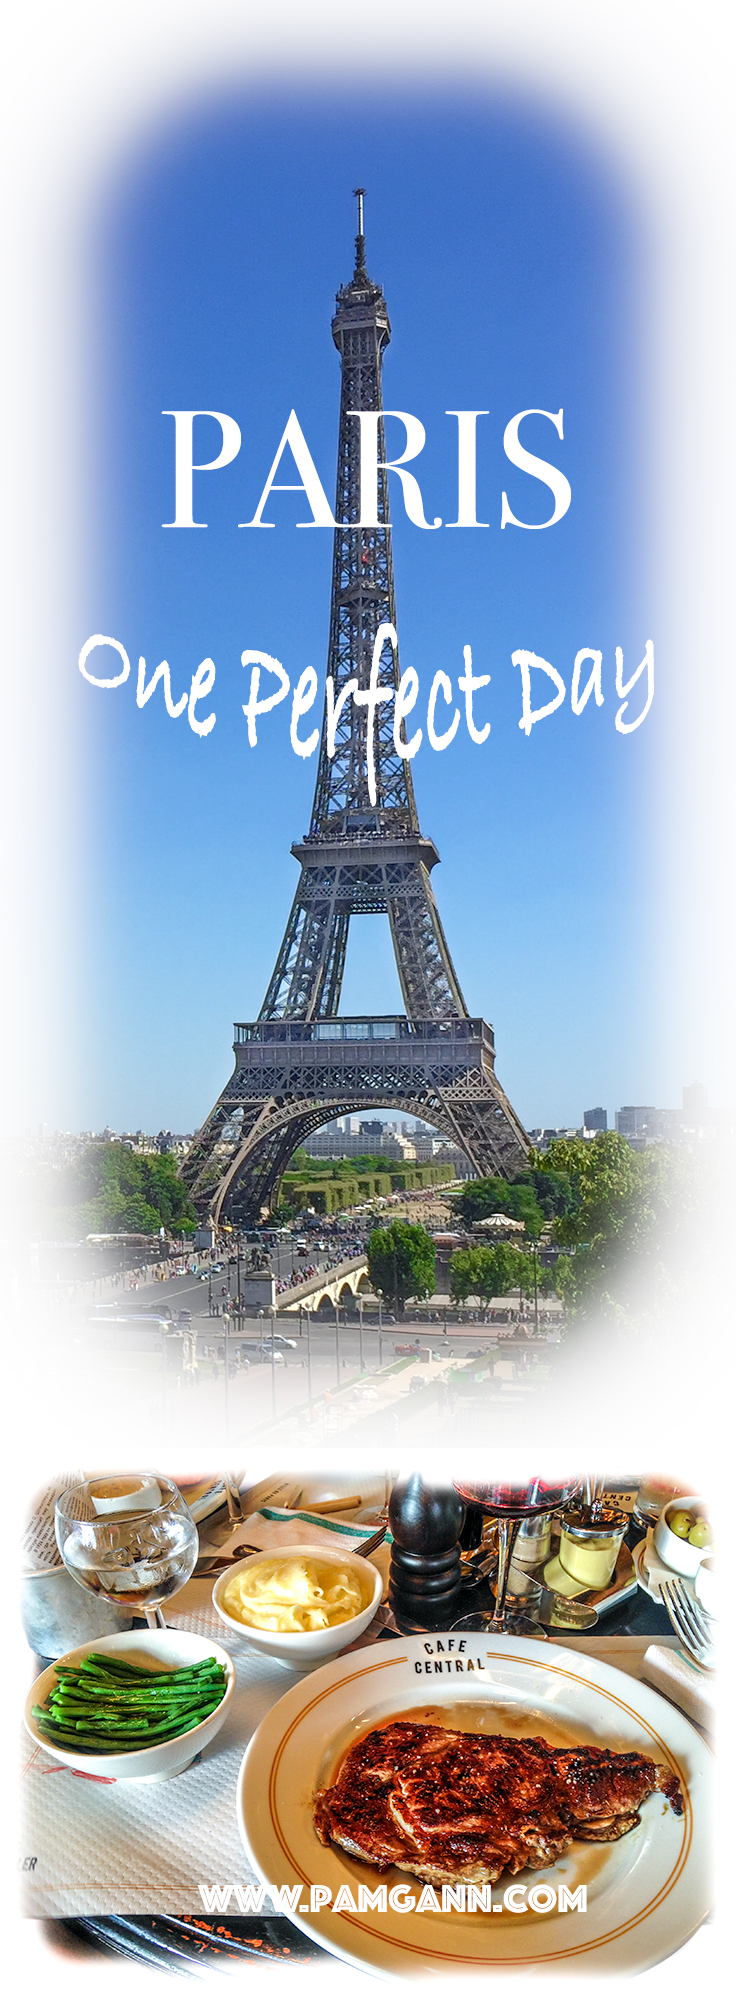 We only got to spend one day in Paris but it was perfect. A dream come true! #familytravel 